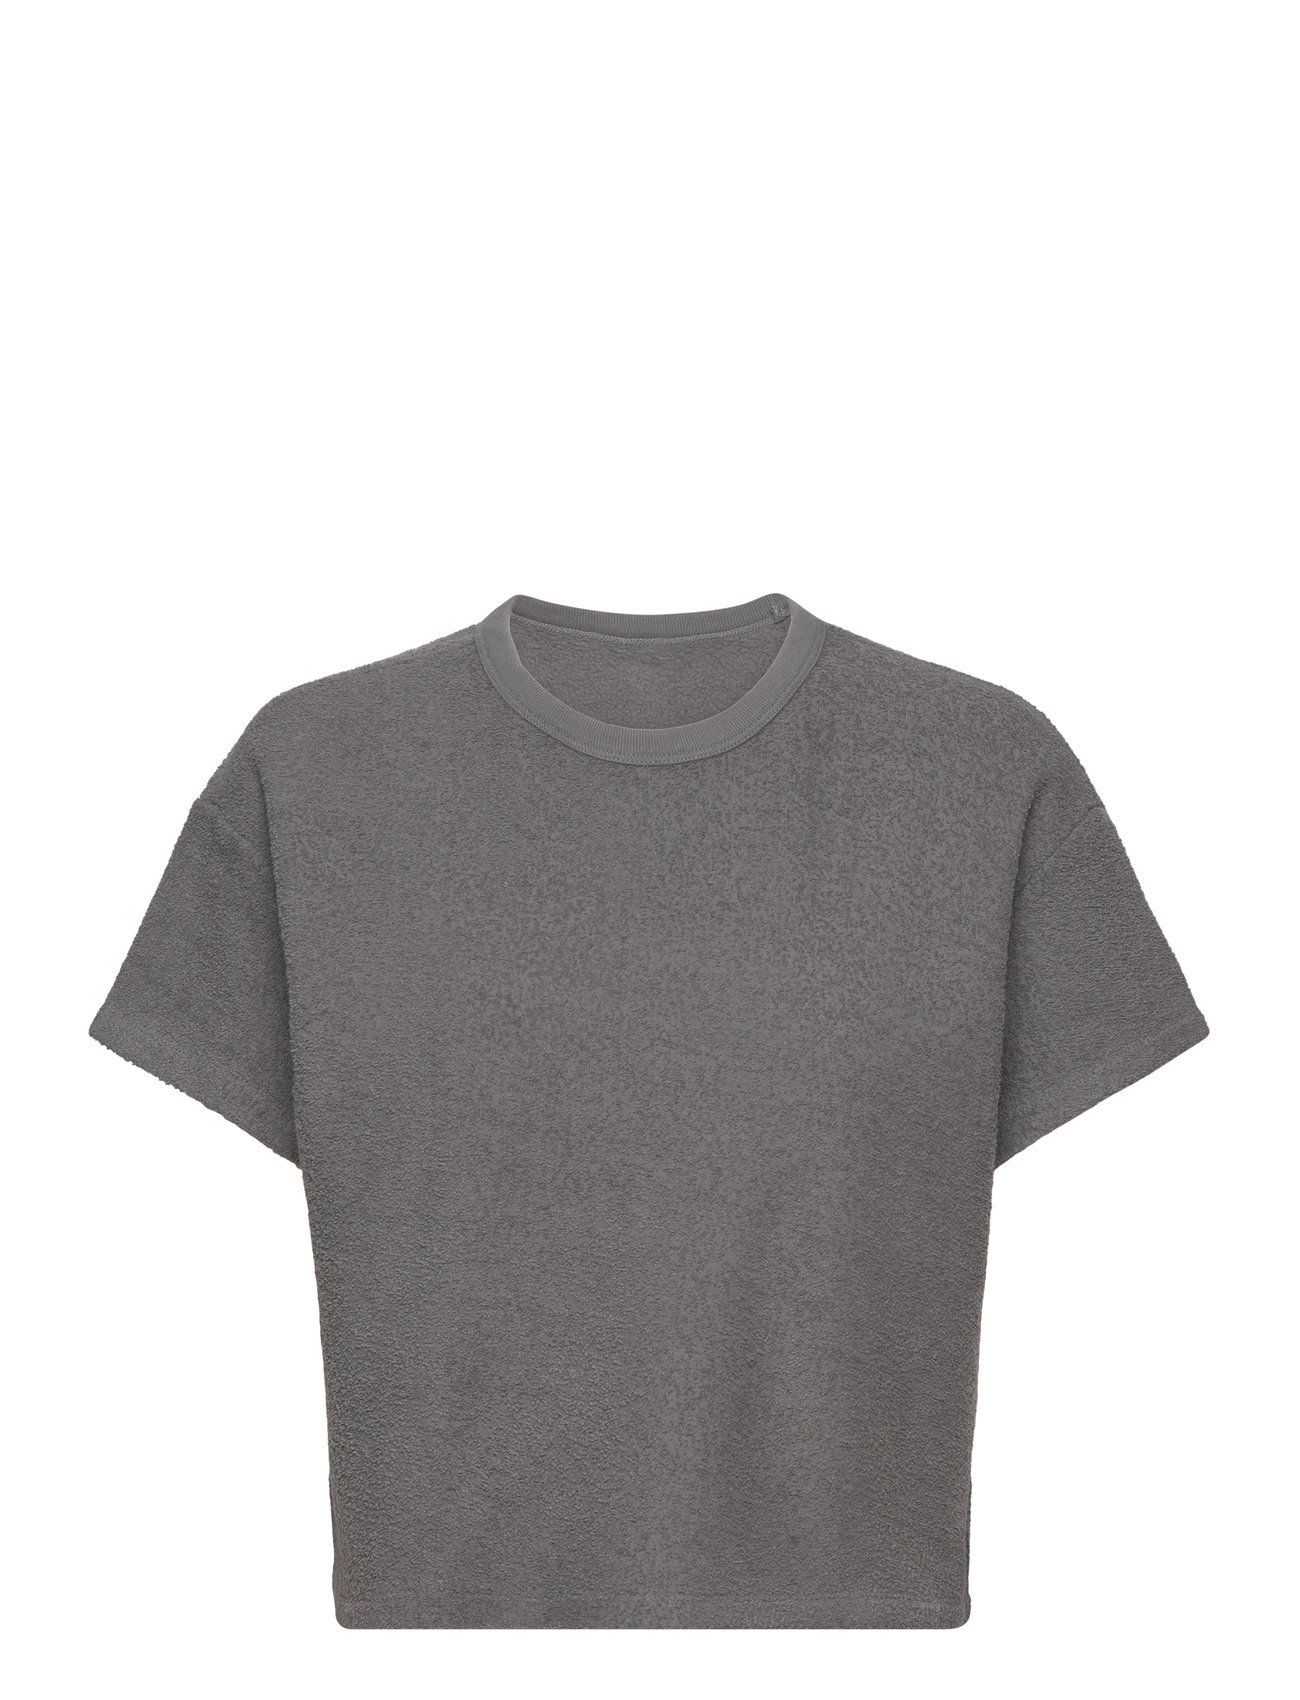 Bobypark Tops T-shirts & Tops Short-sleeved Grey American Vintage